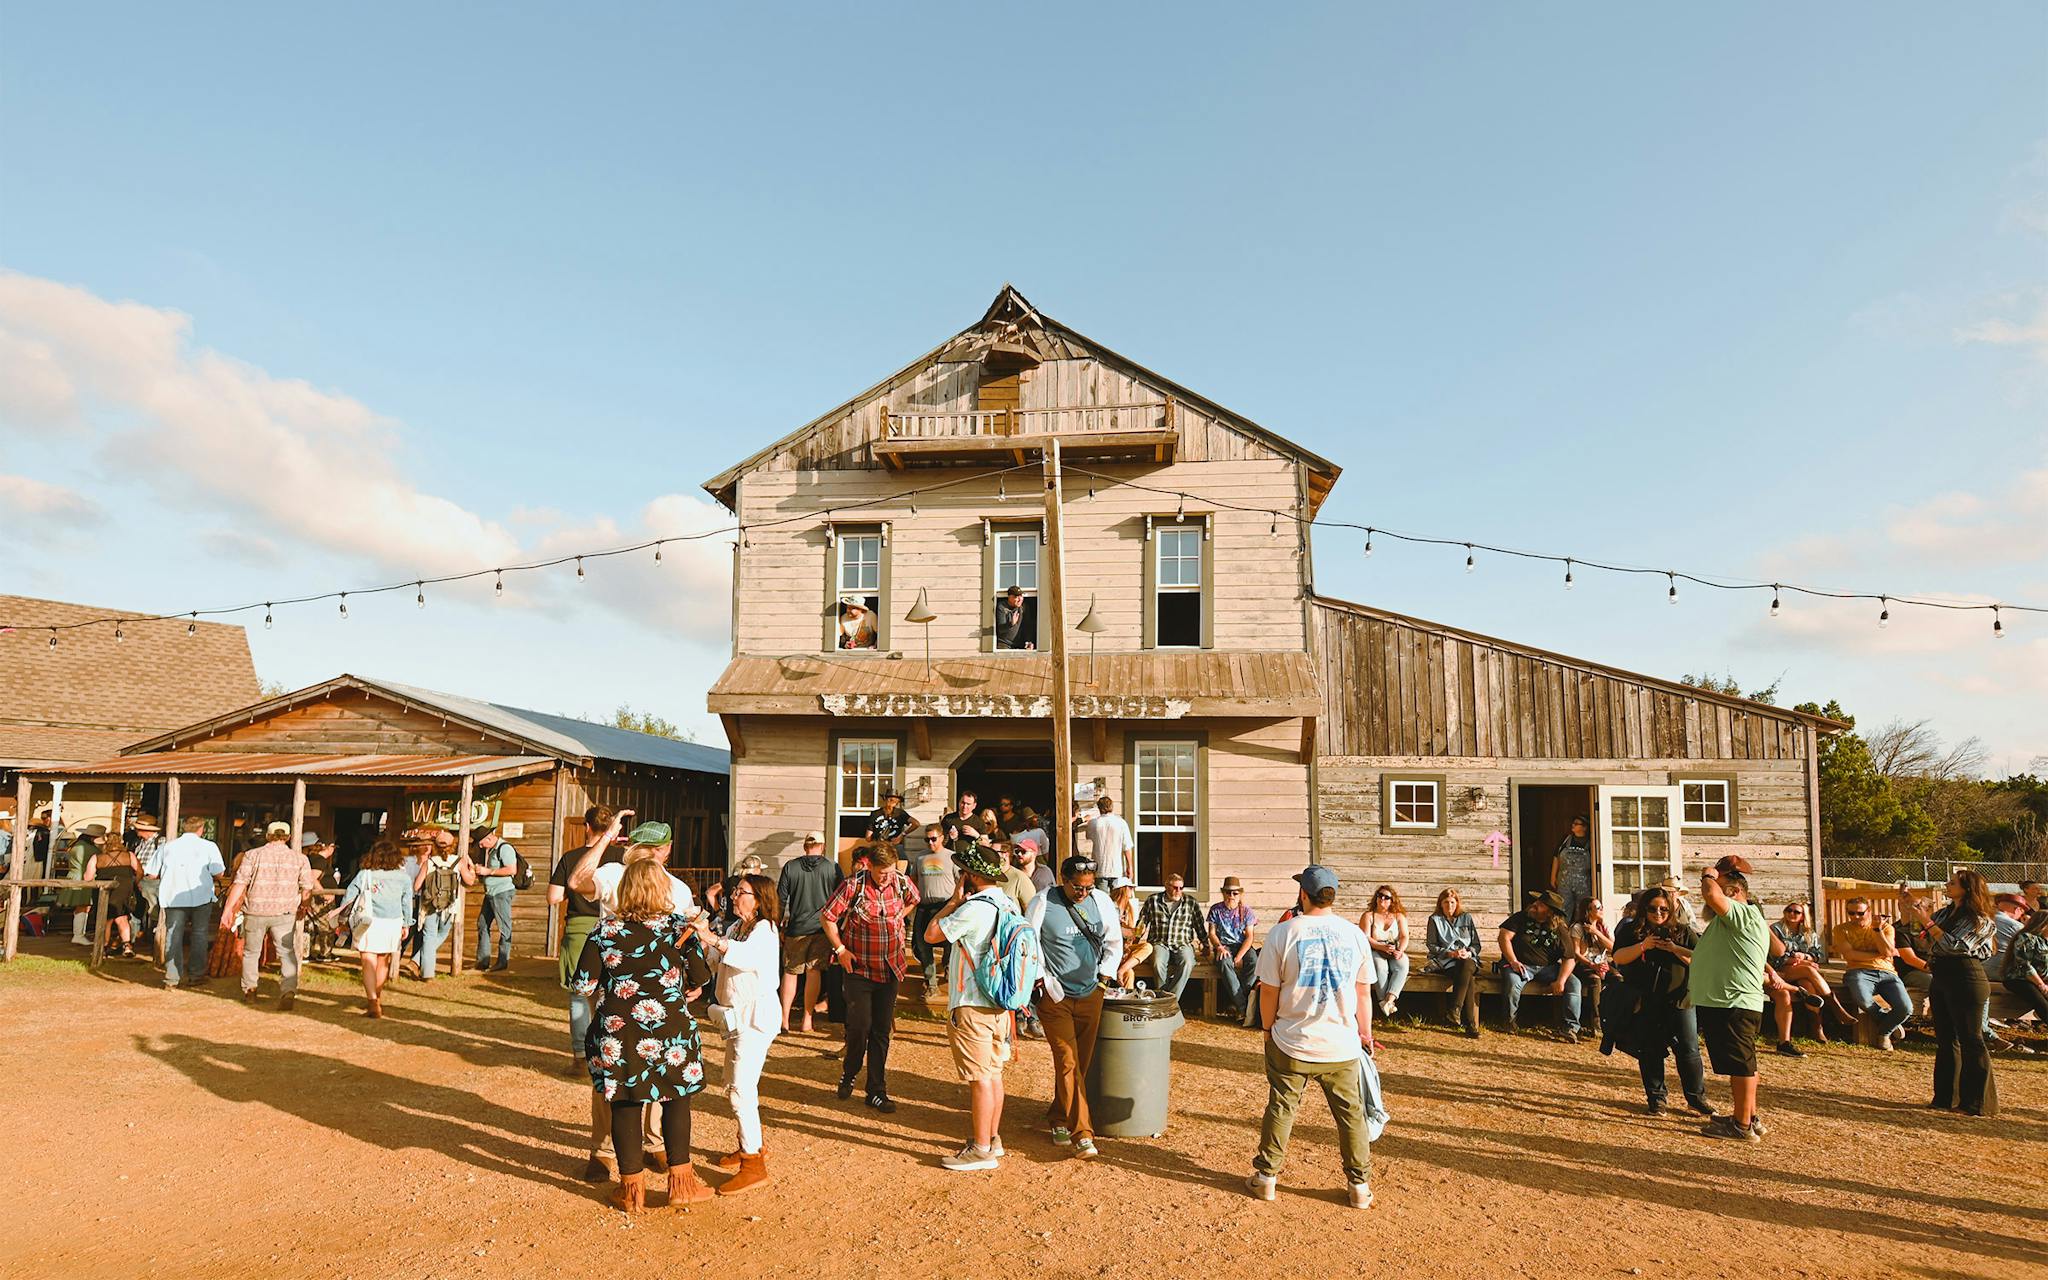 The crowd dips in and out of the Luck Opry House. Originally used for the filming of Red Headed Stranger, it was repurposed for the reunion as the Saloon stage.